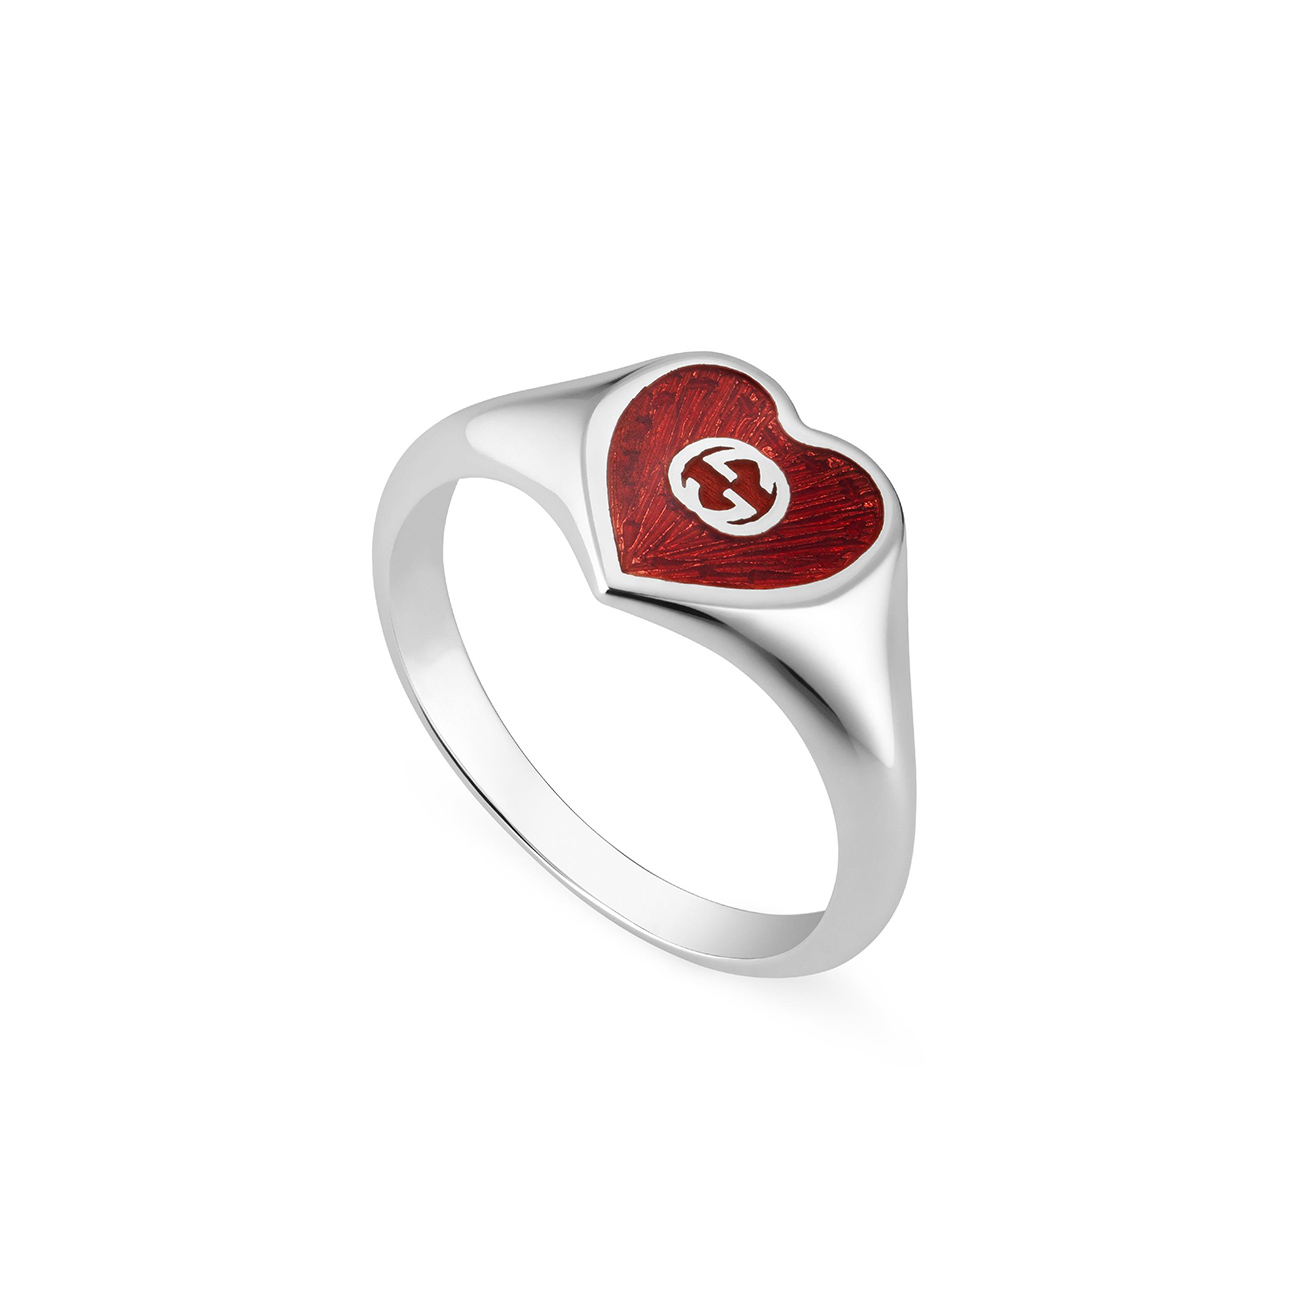 Gucci Heart Silver Ring with Interlocking G